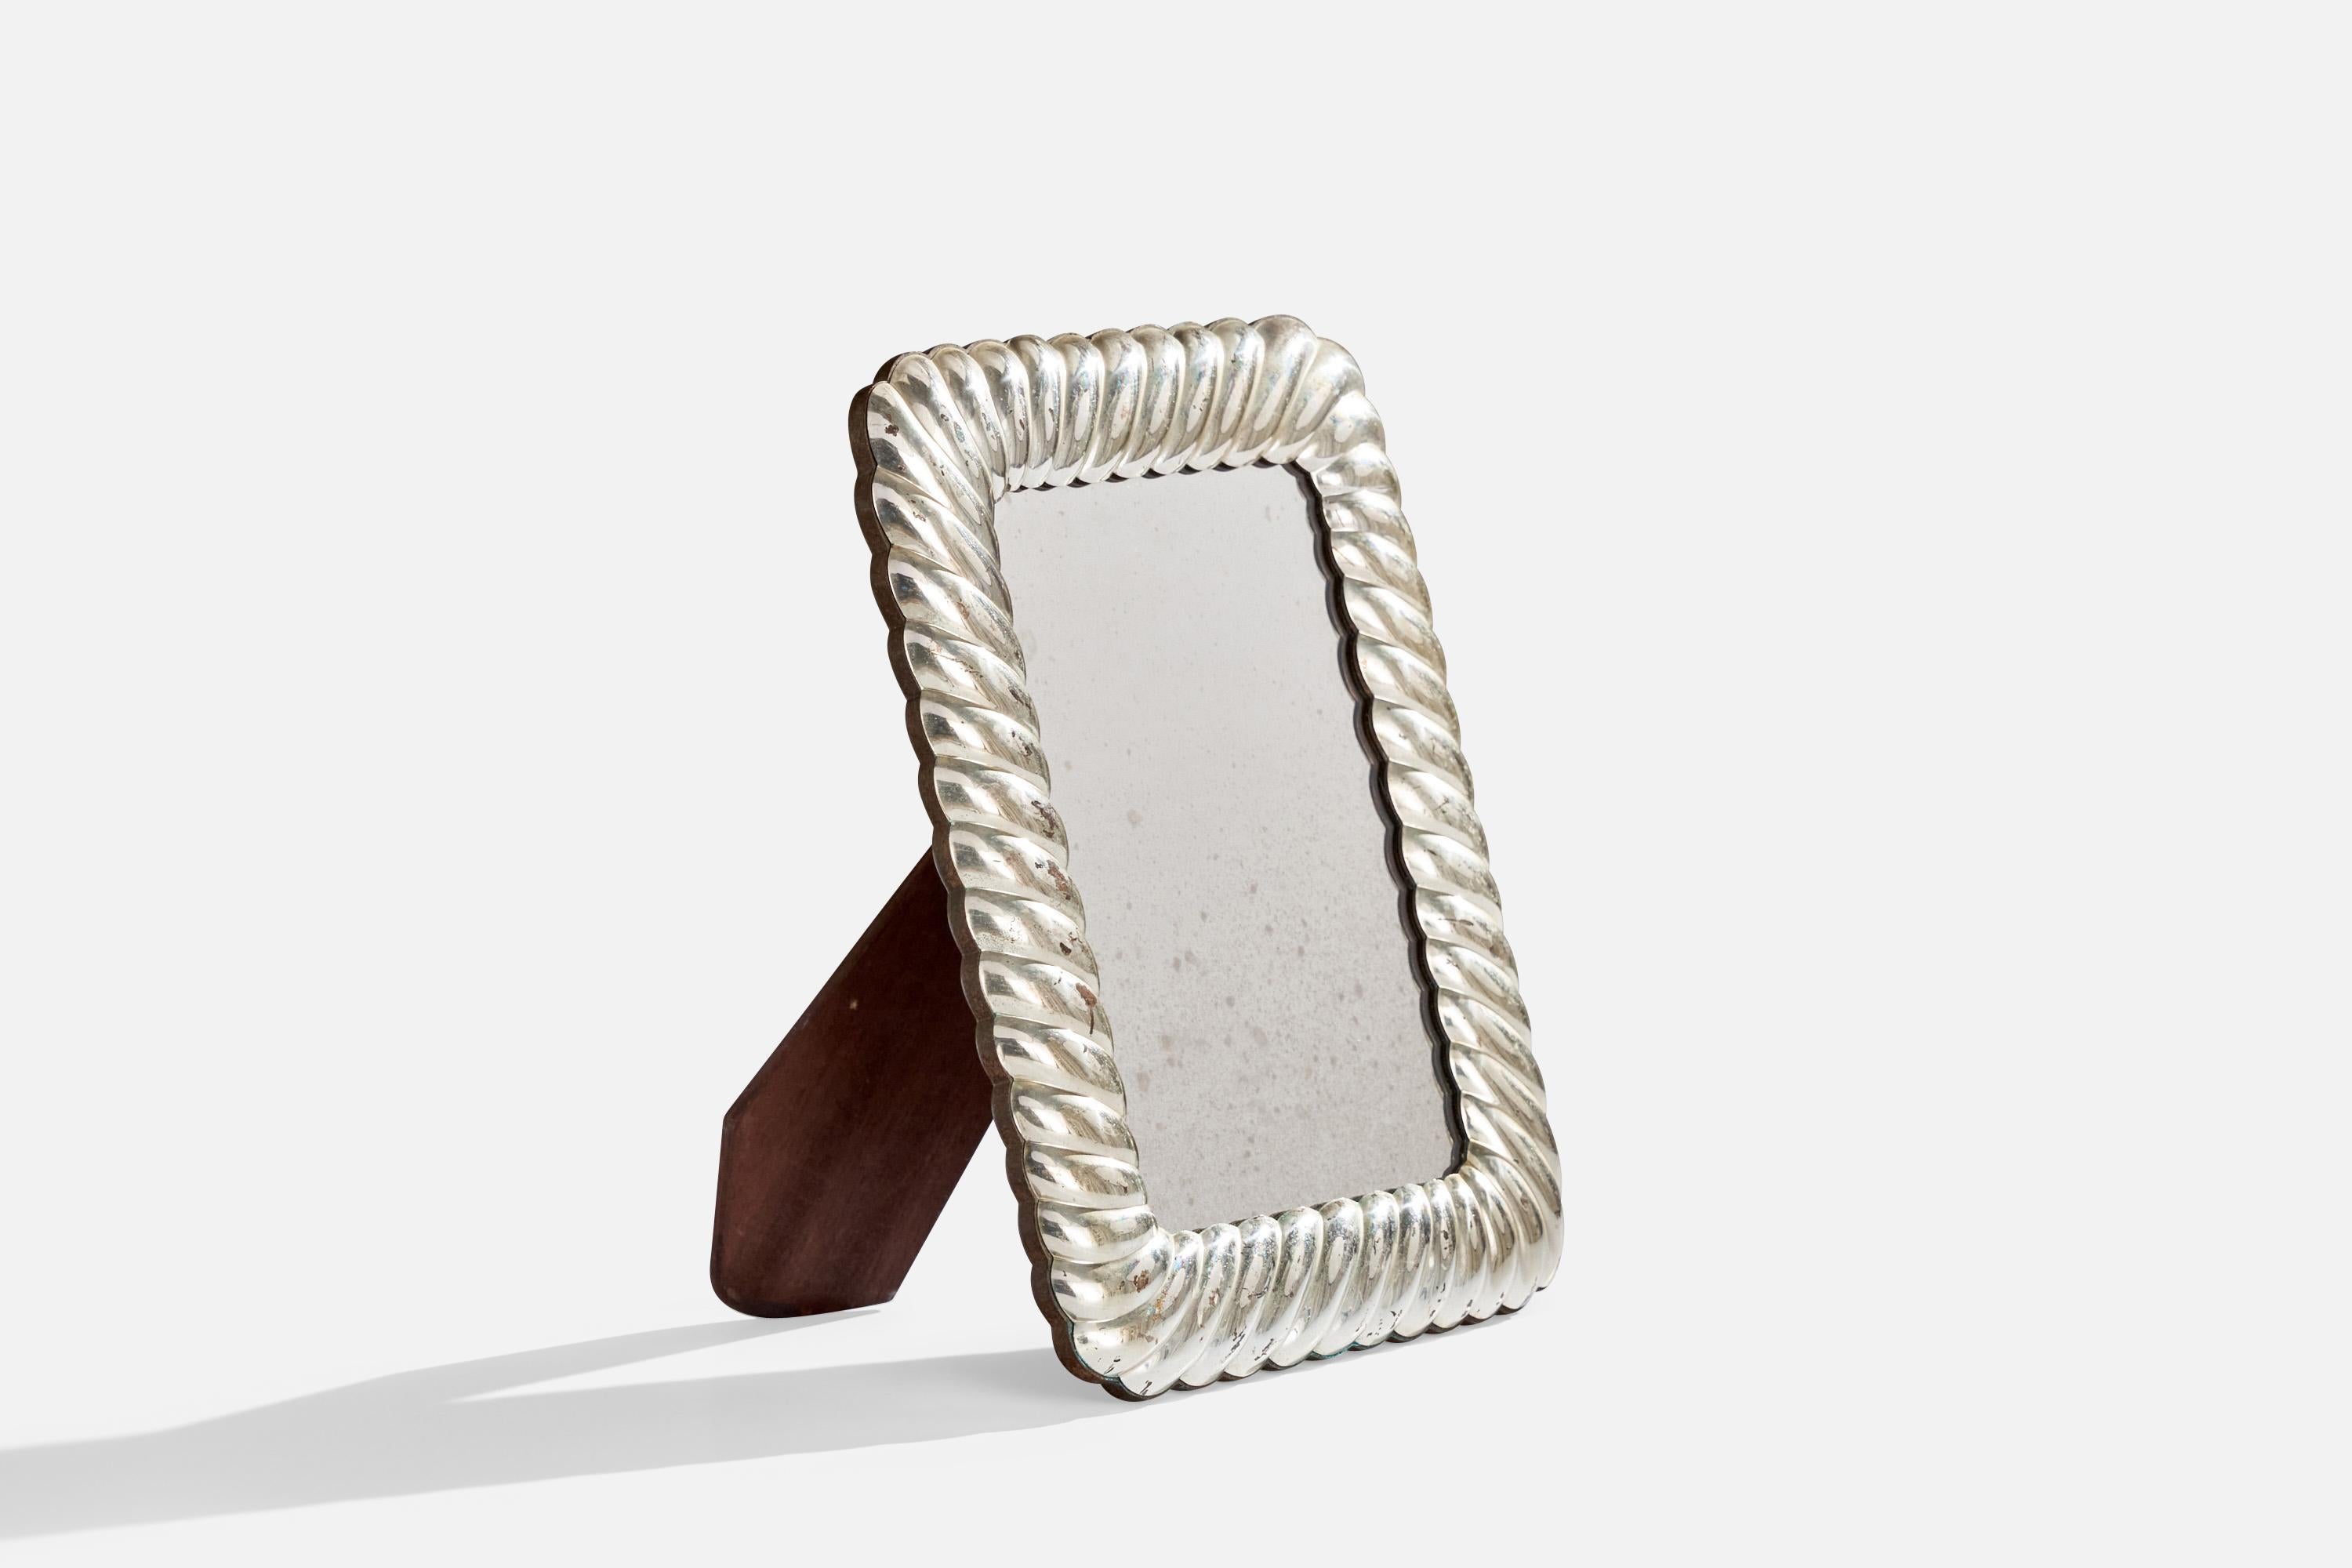 A small sterling silver wall mirror designed and produced in Italy, c. 1960s.
With mountings for either wall or table top.